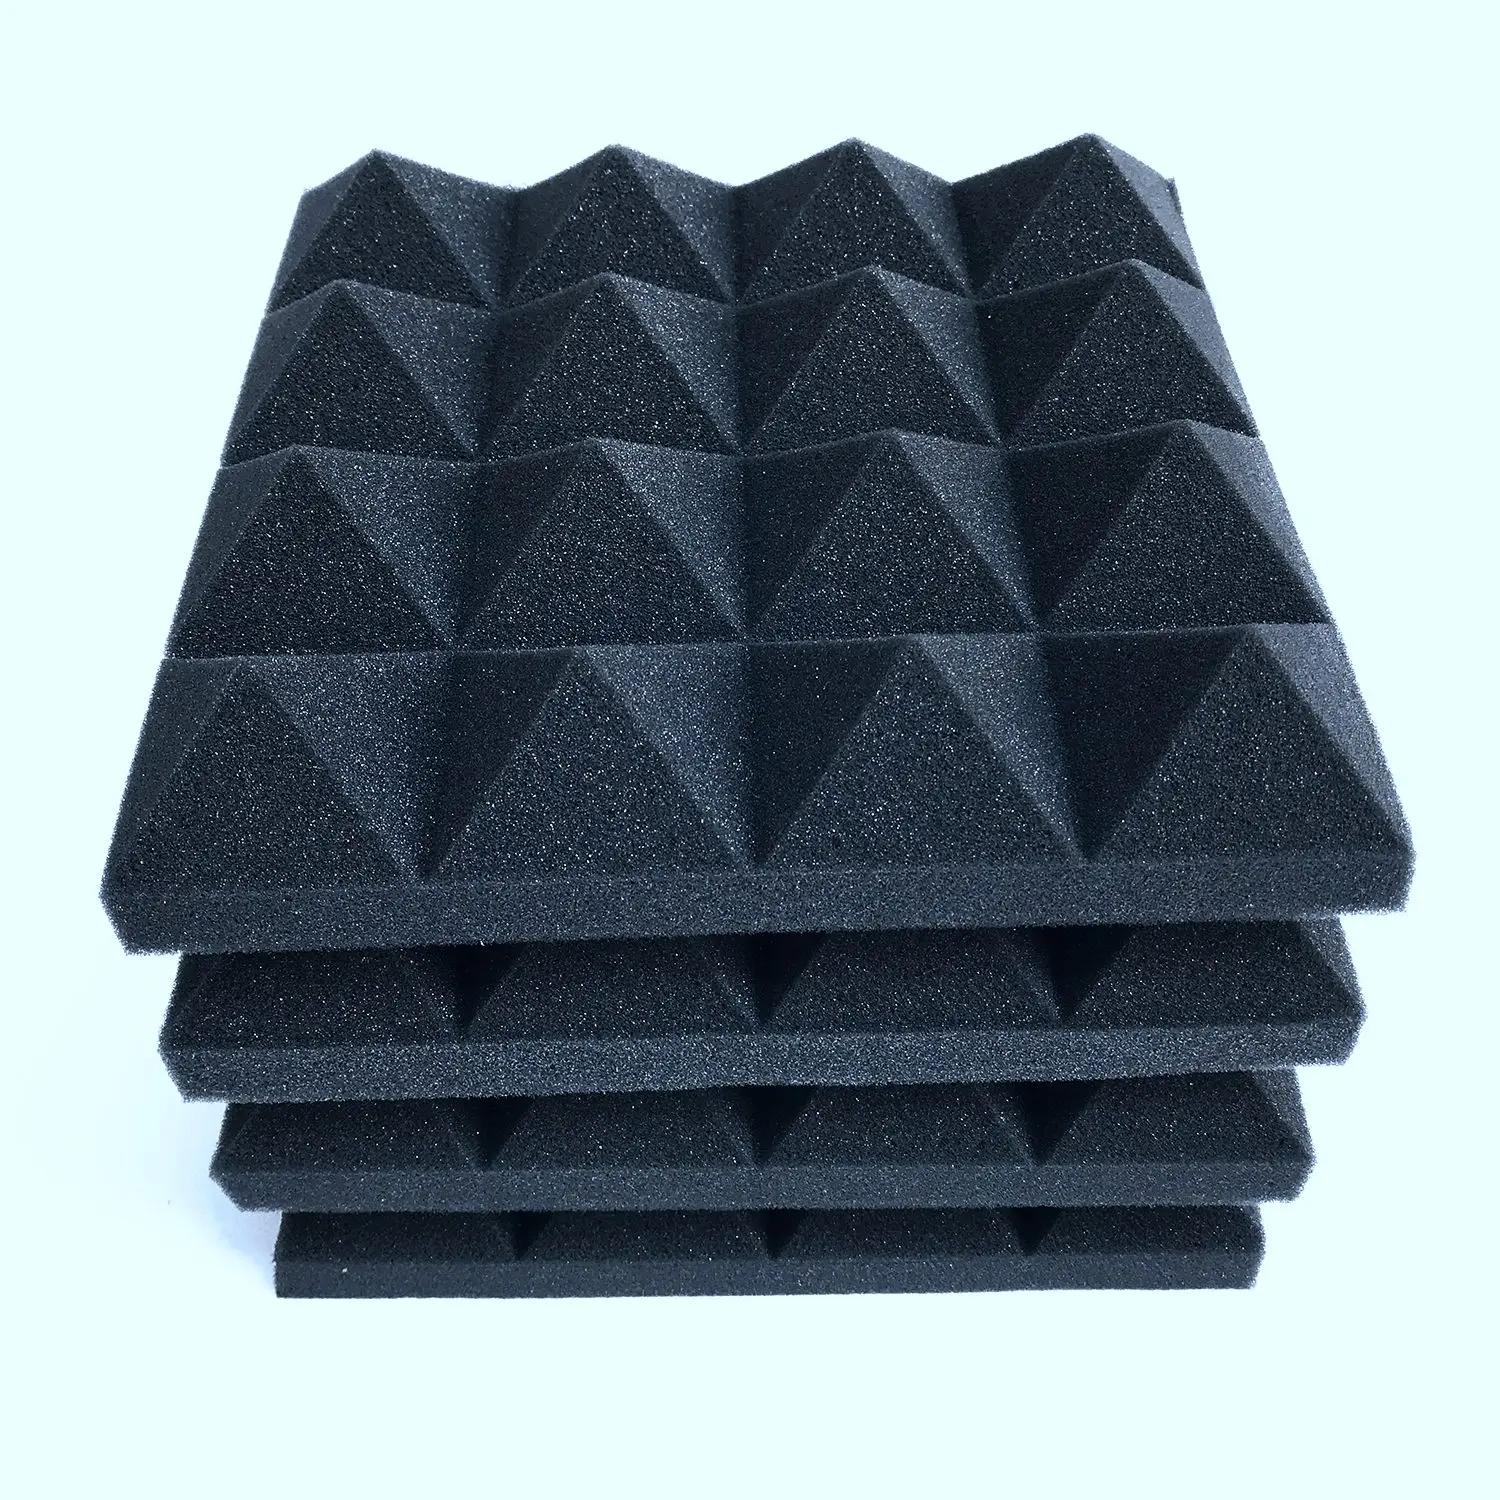 Kuchoow 12 Pack Sound Proof Foam Panels for Walls Pyramid Type 2 X 12 X 12 Acoustic Panels Sounds Absorbing Foam Padding for Decreasing Noise and Echoes Soundproof Foam for indoor 